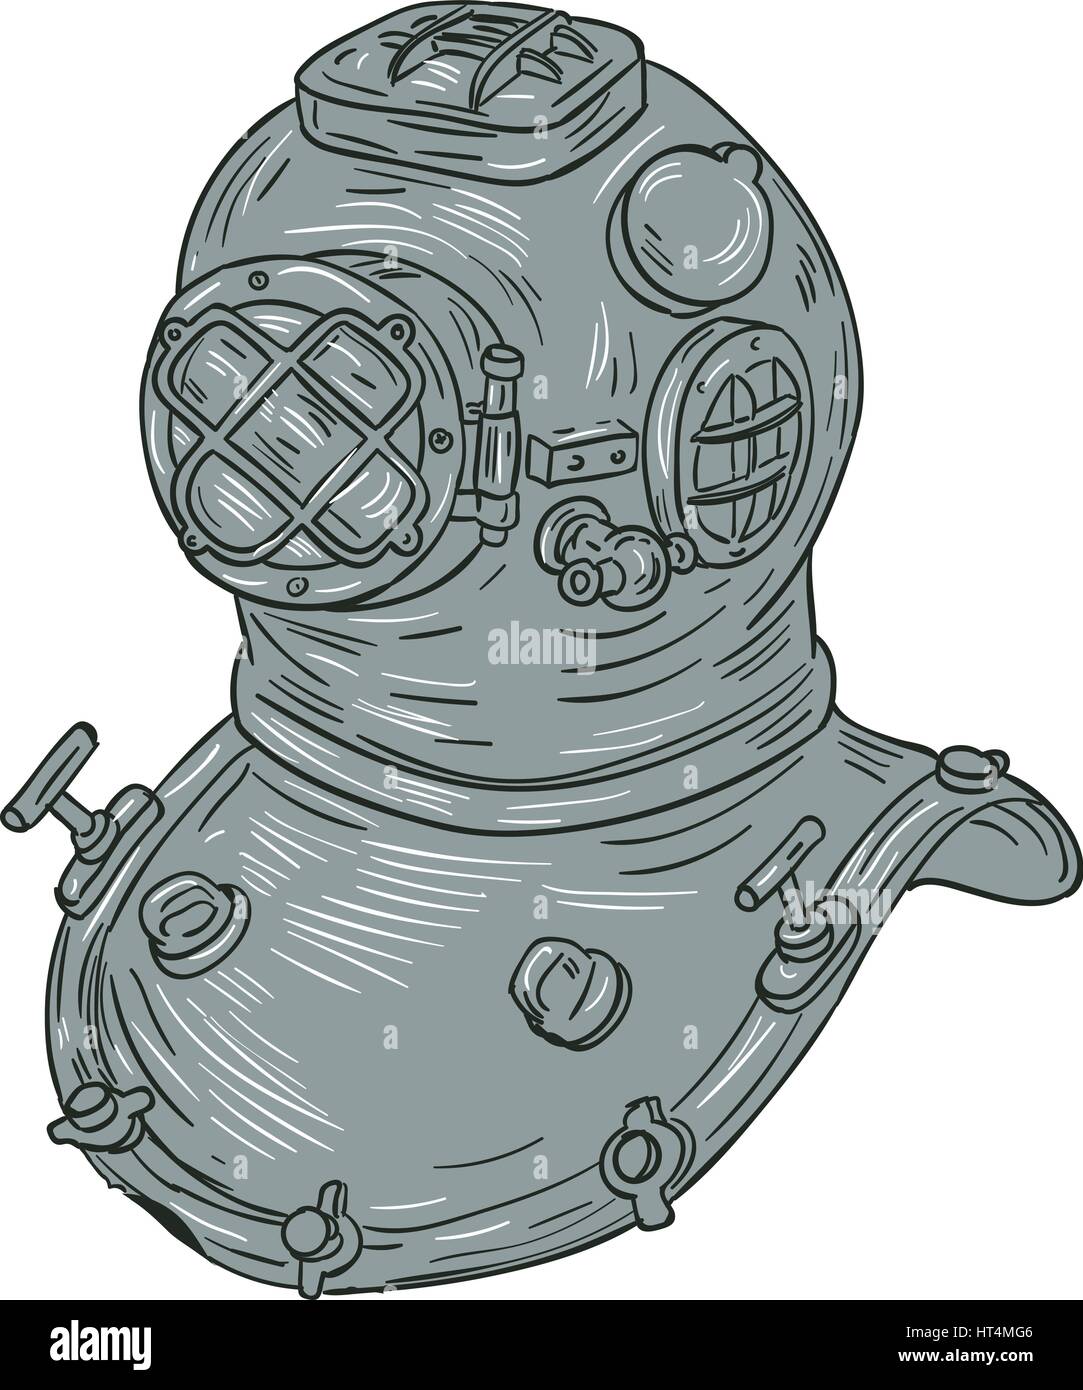 Drawing sketch style illustration of a copper and brass old school deep sea dive diving helmet or Standard diving helmet (Copper hat), worn mainly by  Stock Vector